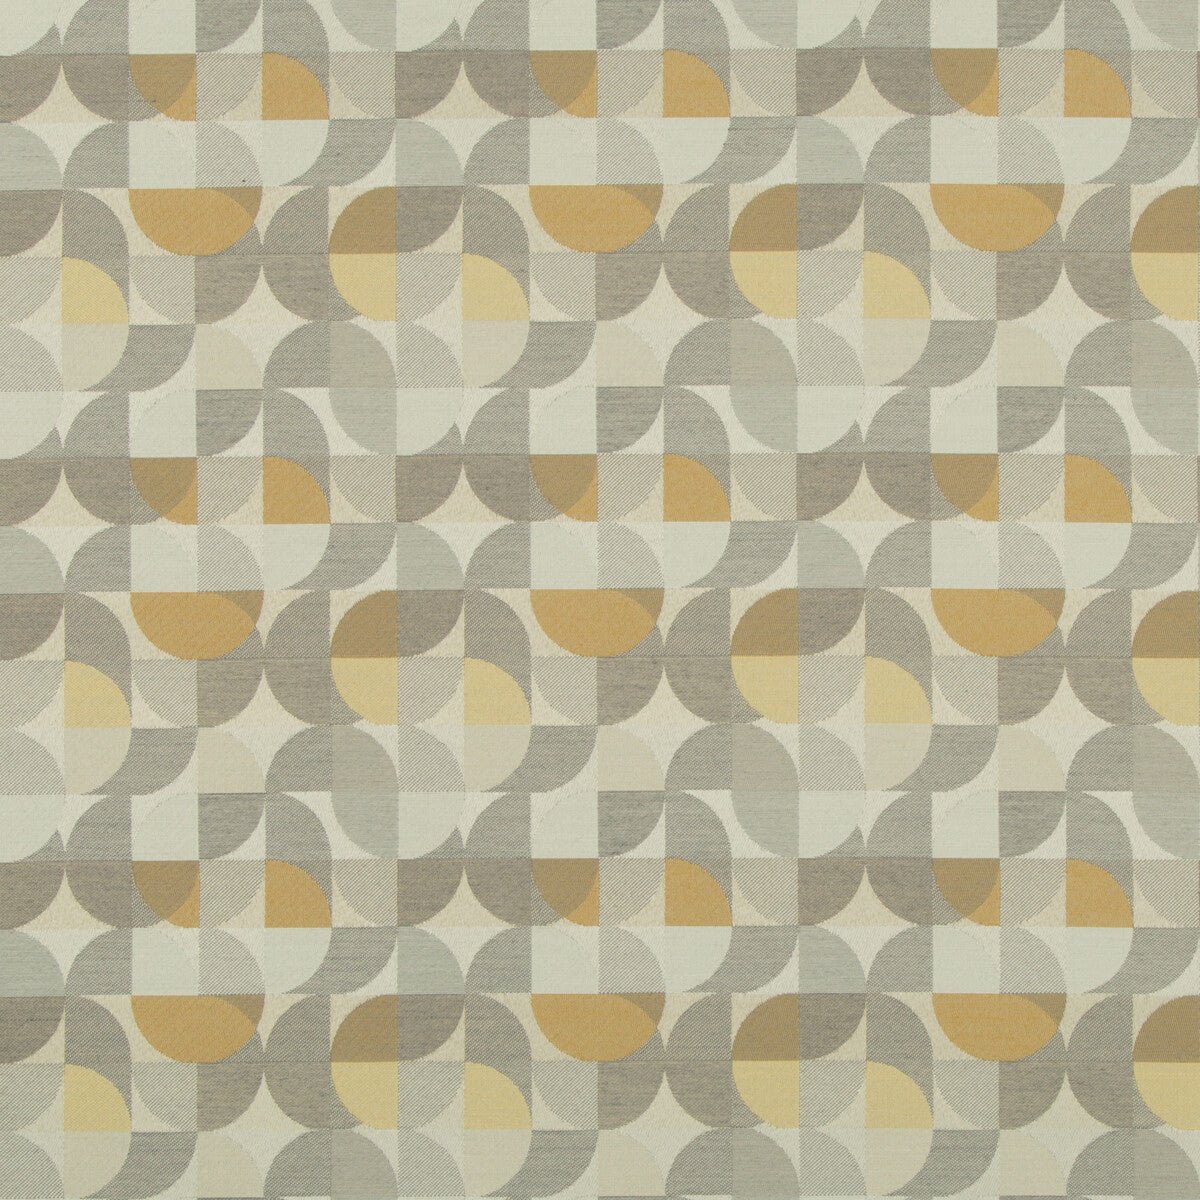 Mix Up fabric in butterscotch color - pattern 35090.11.0 - by Kravet Contract in the Gis Crypton collection